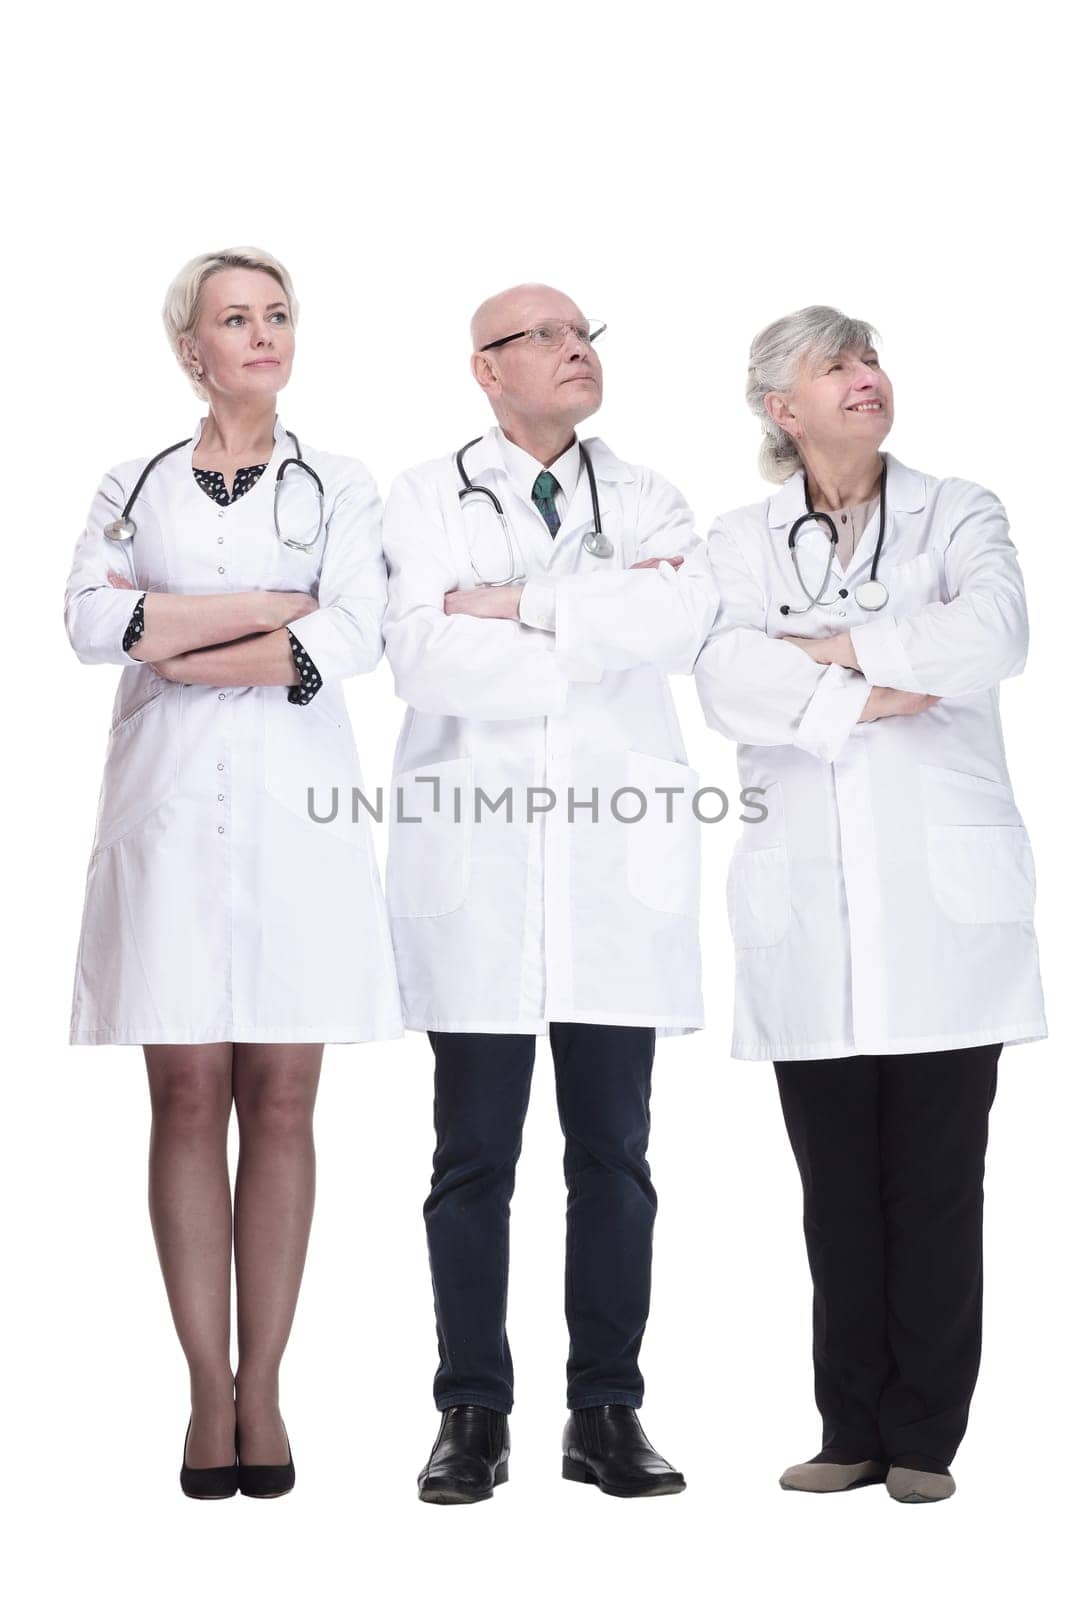 experienced doctors colleagues standing together. isolated on a white background. by asdf